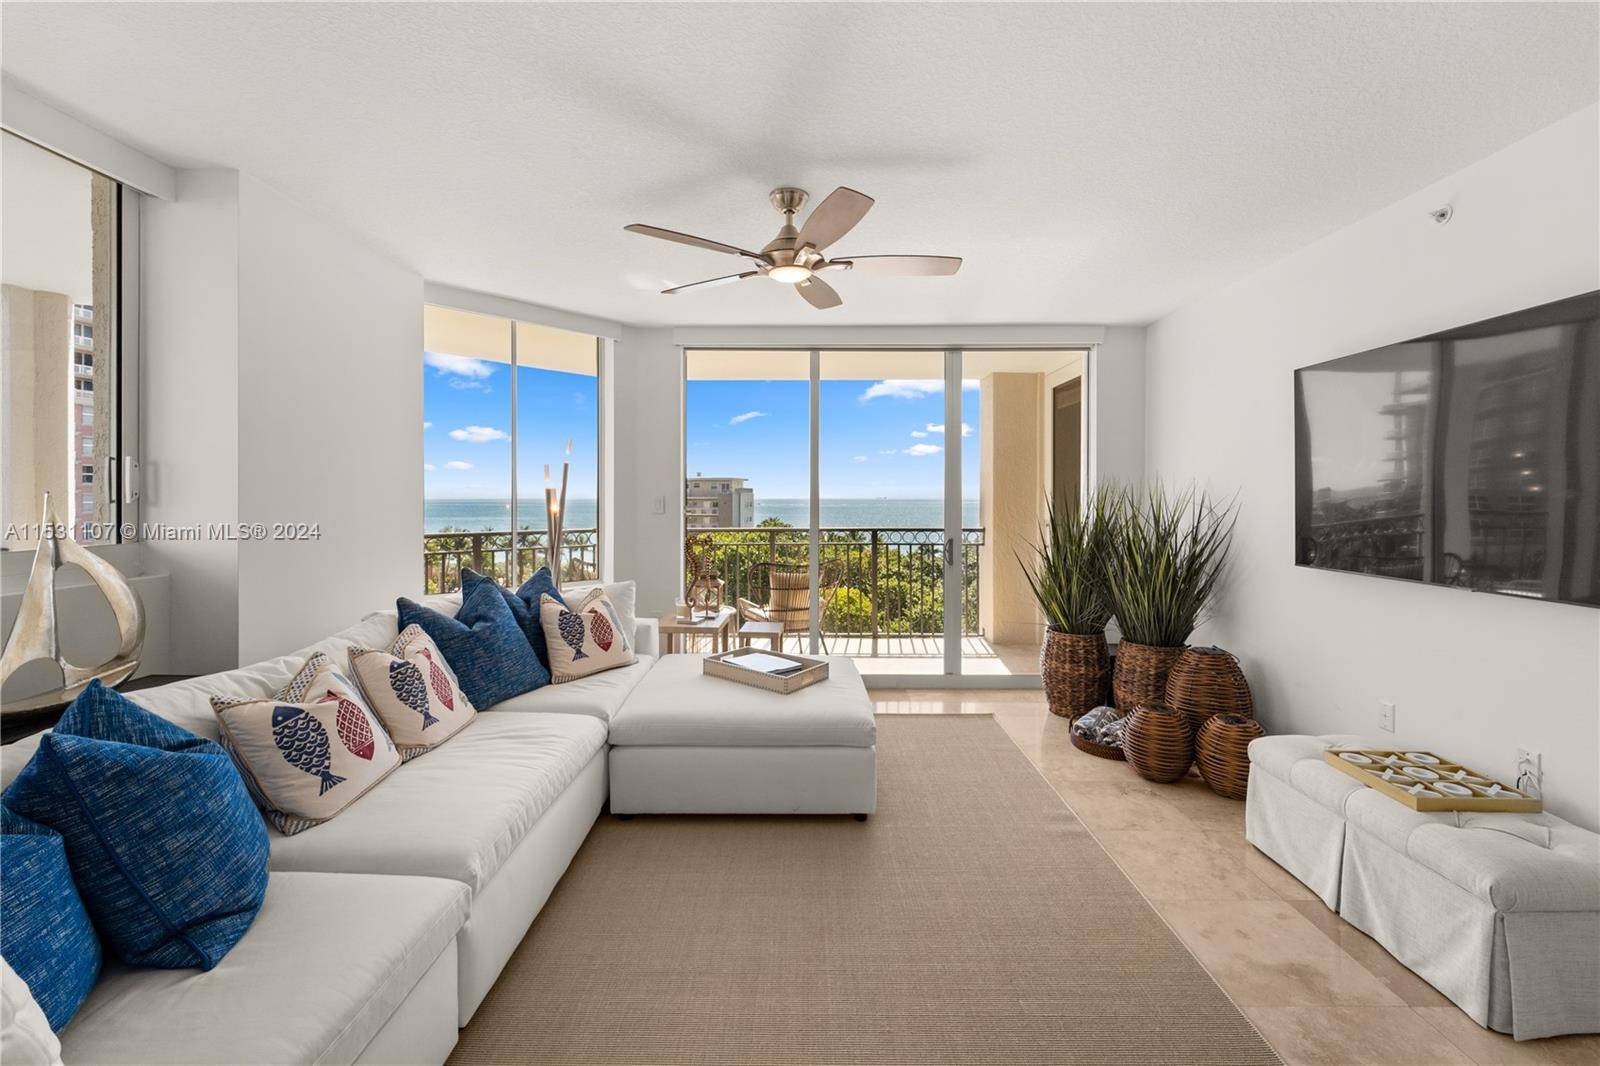 Discover the epitome of luxurious living in this stunning 3 bedroom 3 Bathroom residence with a desirable northeast exposure, boasting breathtaking ocean views.